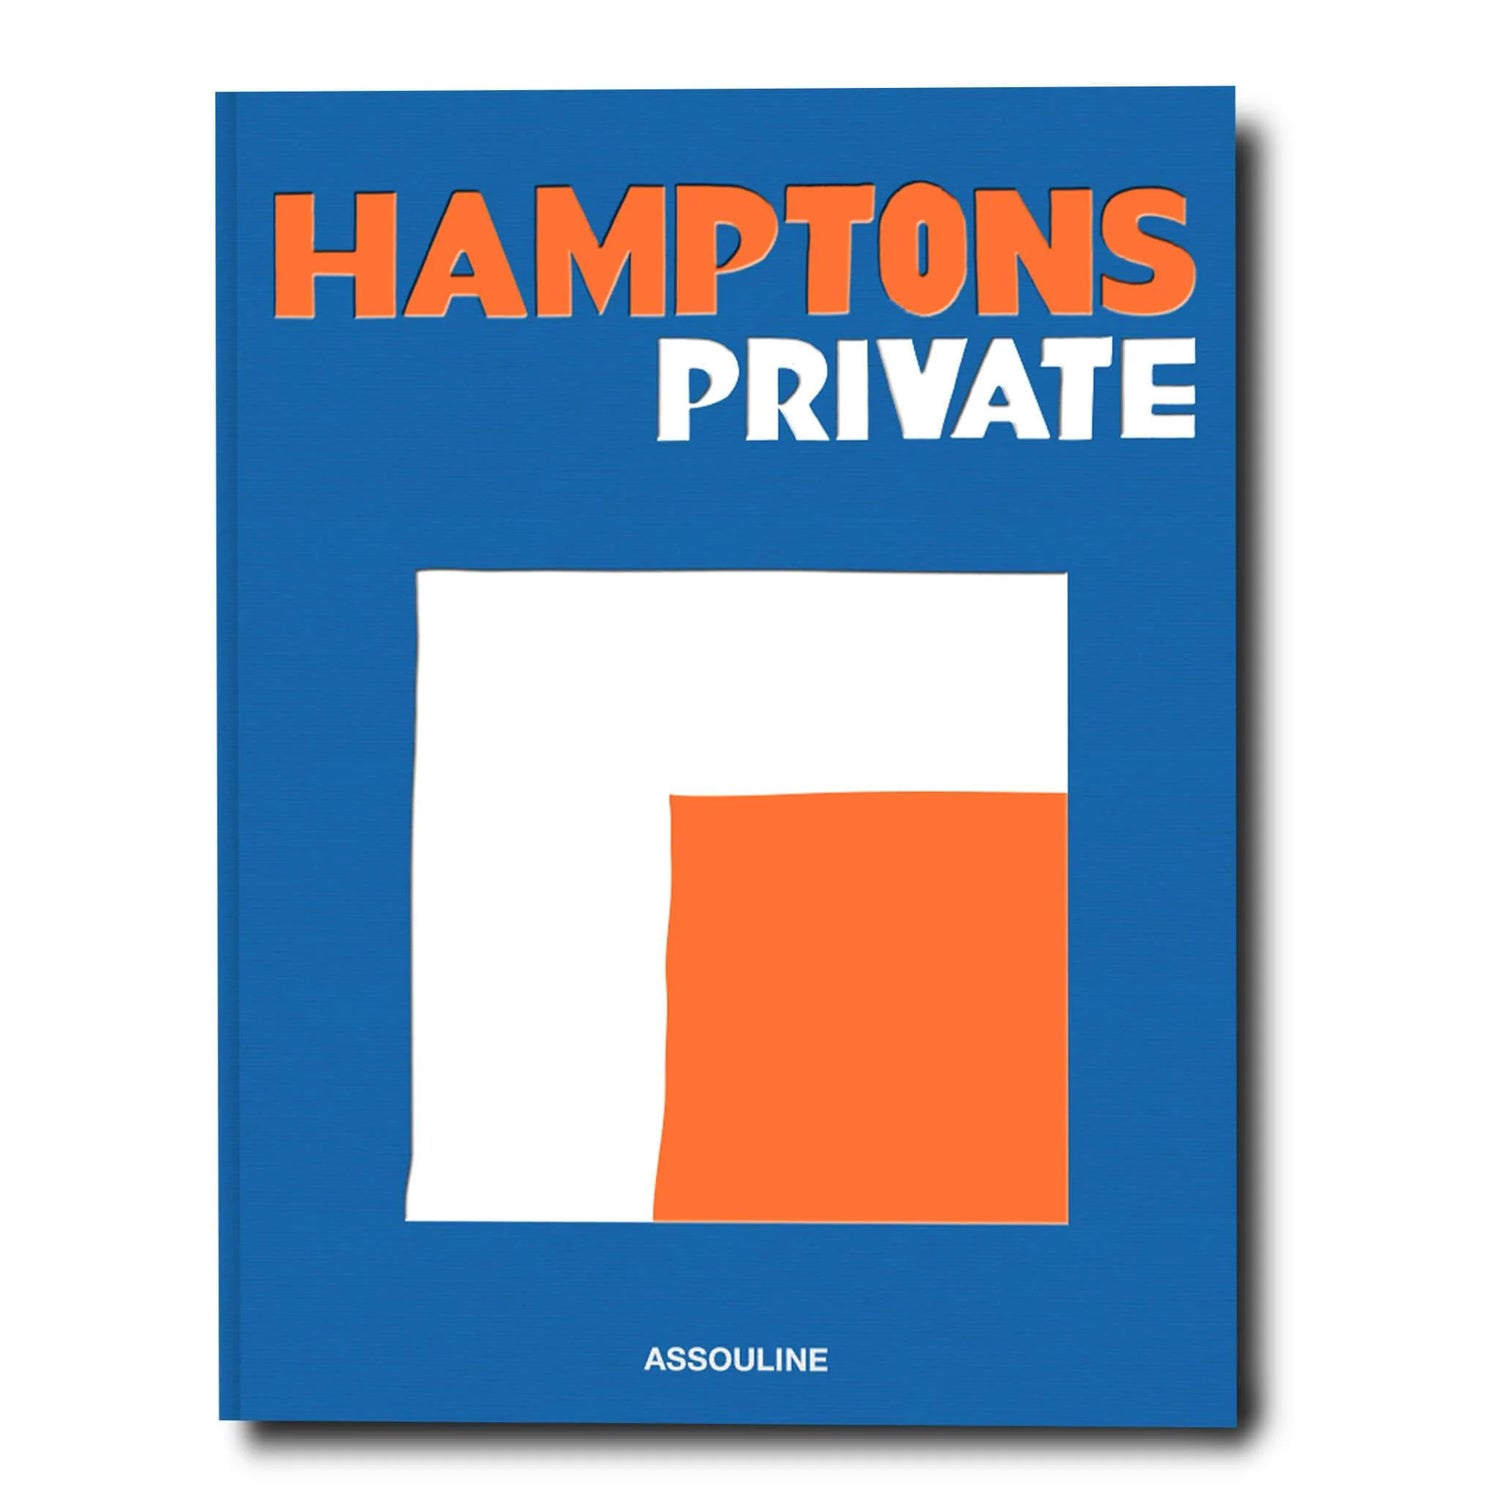 Travel Book Books in Hamptons Private at Wrapsody